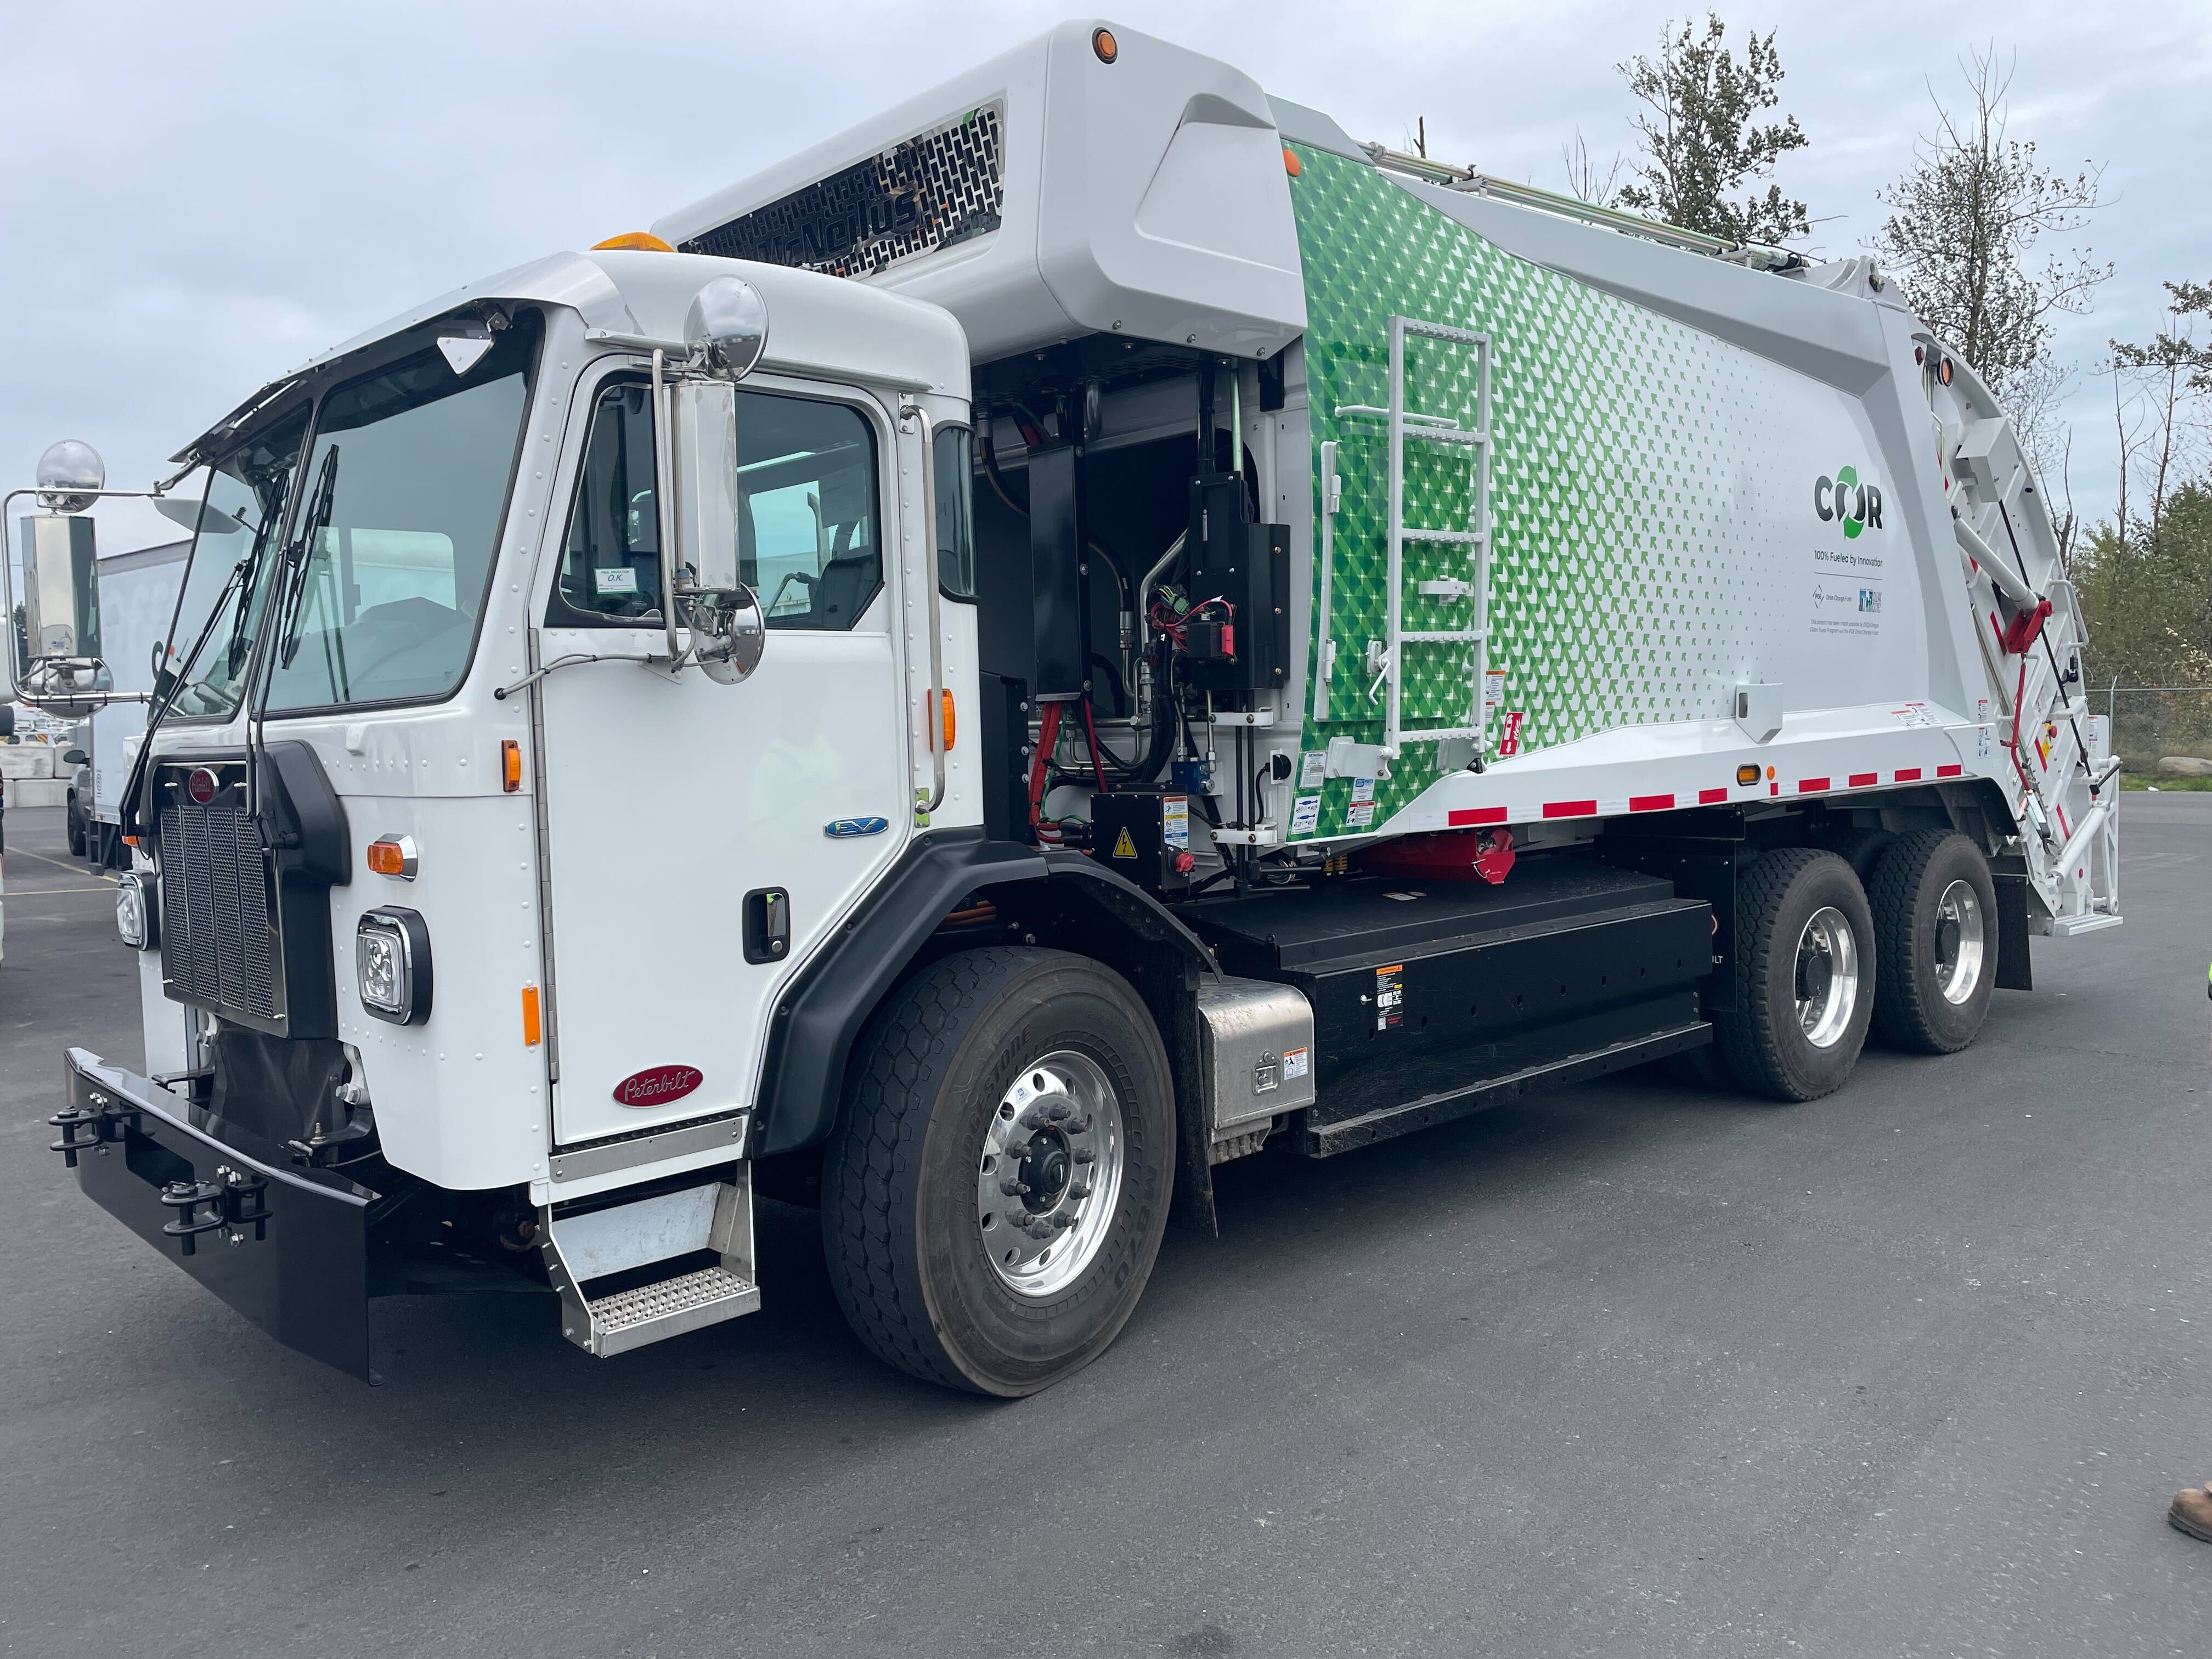 Portland\'s first electric garbage truck will hit eastside streets soon - OPB